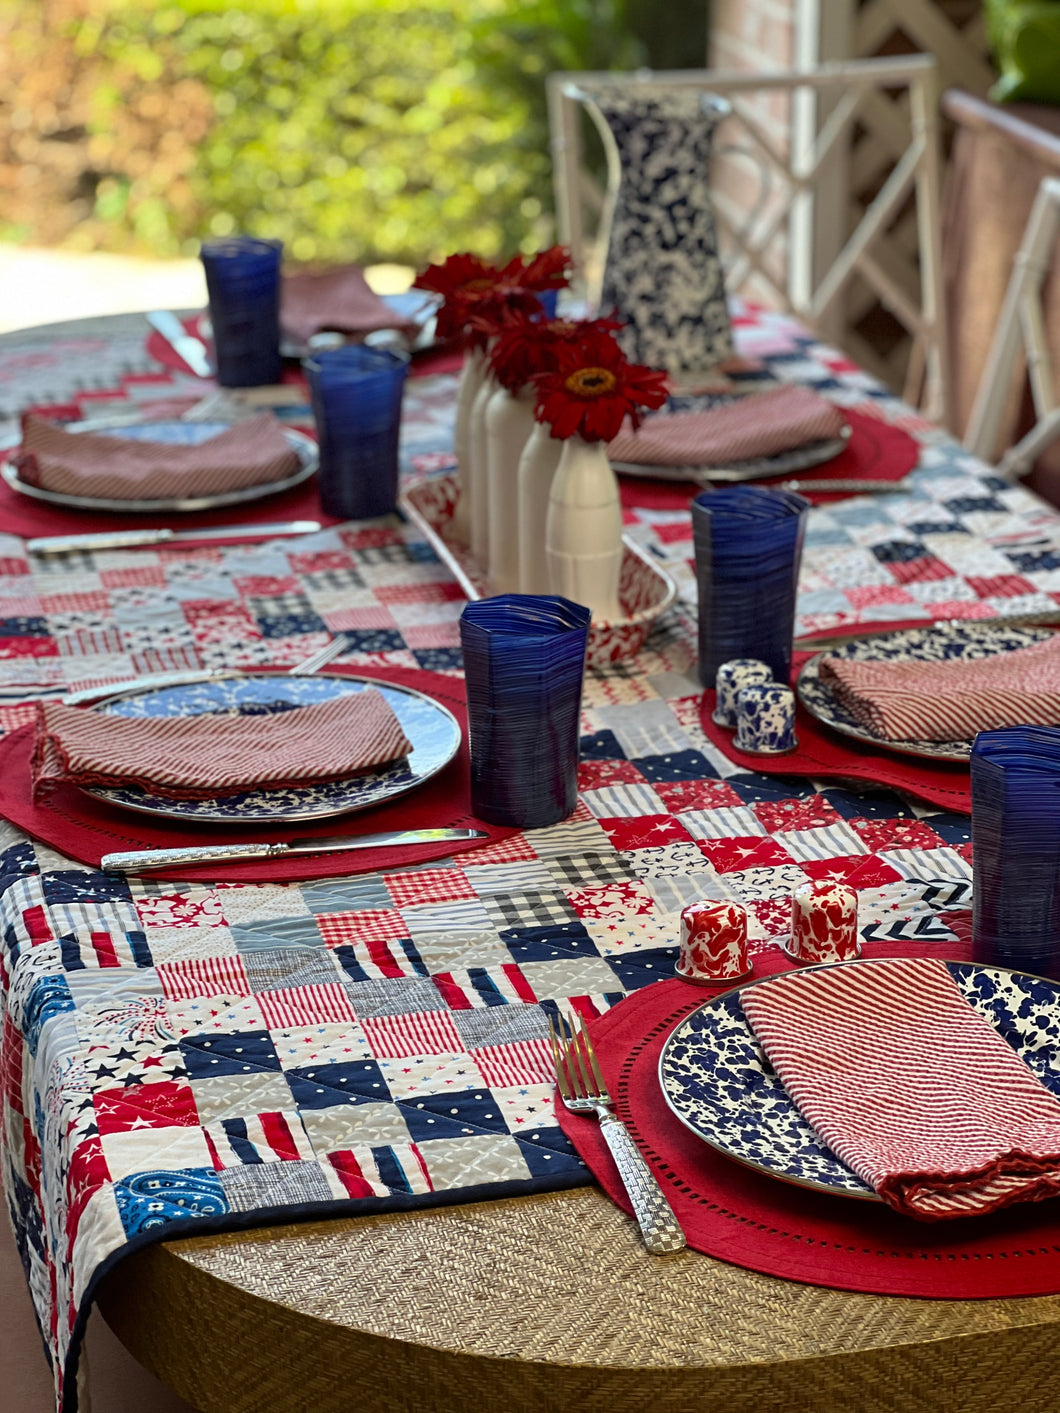 Patriotic Quilt/Tablecloth - One of a kind.